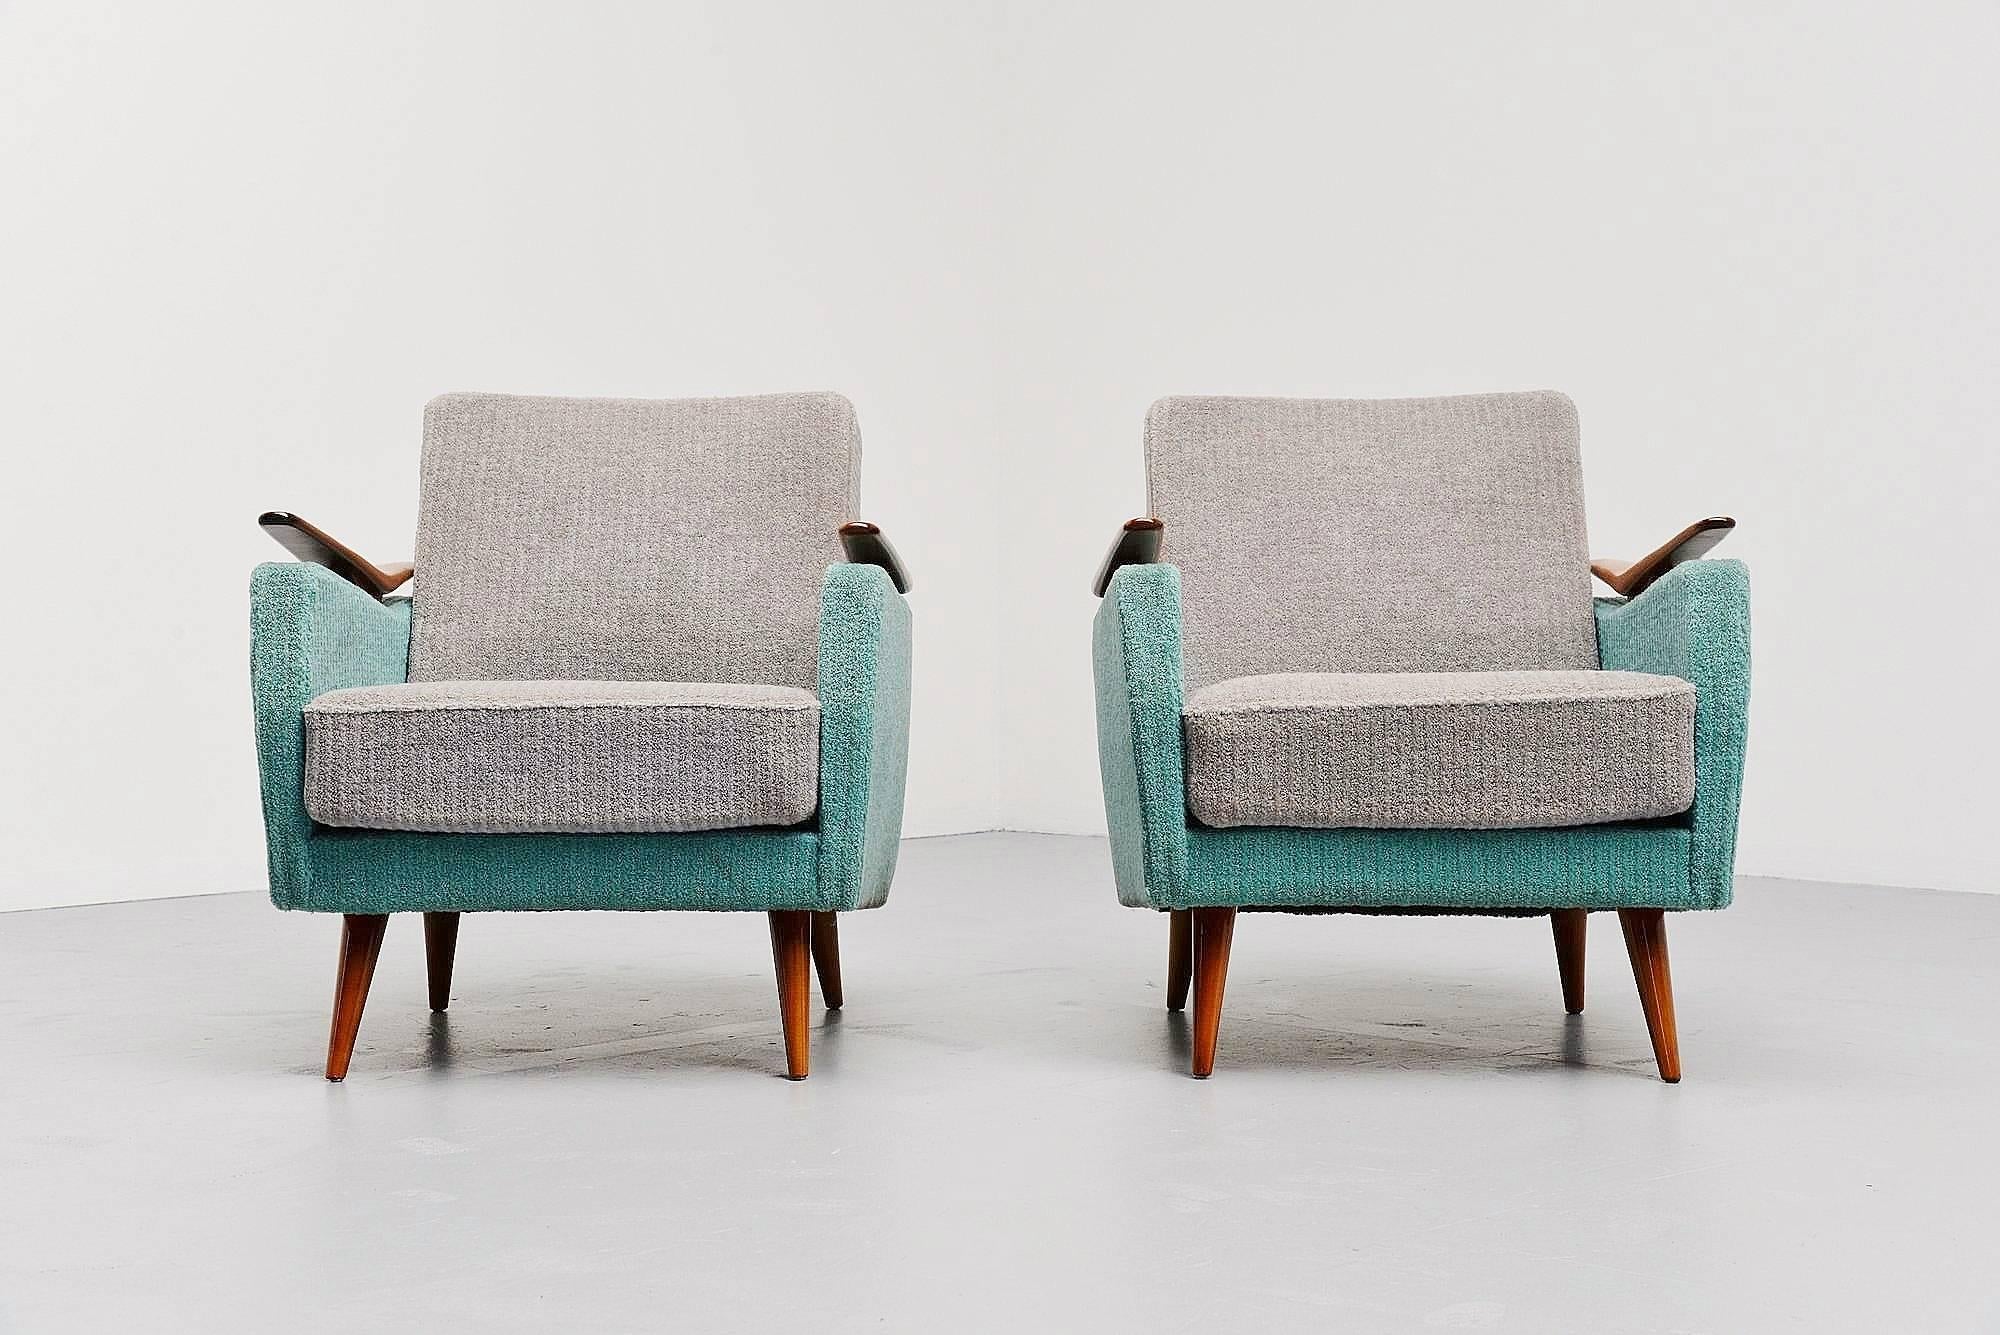 Very nice pair of club chairs in the manner of Gio Ponti, made by unknown manufacturer in Italy 1950. The chairs have original fluffy mint blue and grey fabric which is still in very good condition. Its nice in contrast with the teak wooden feet and